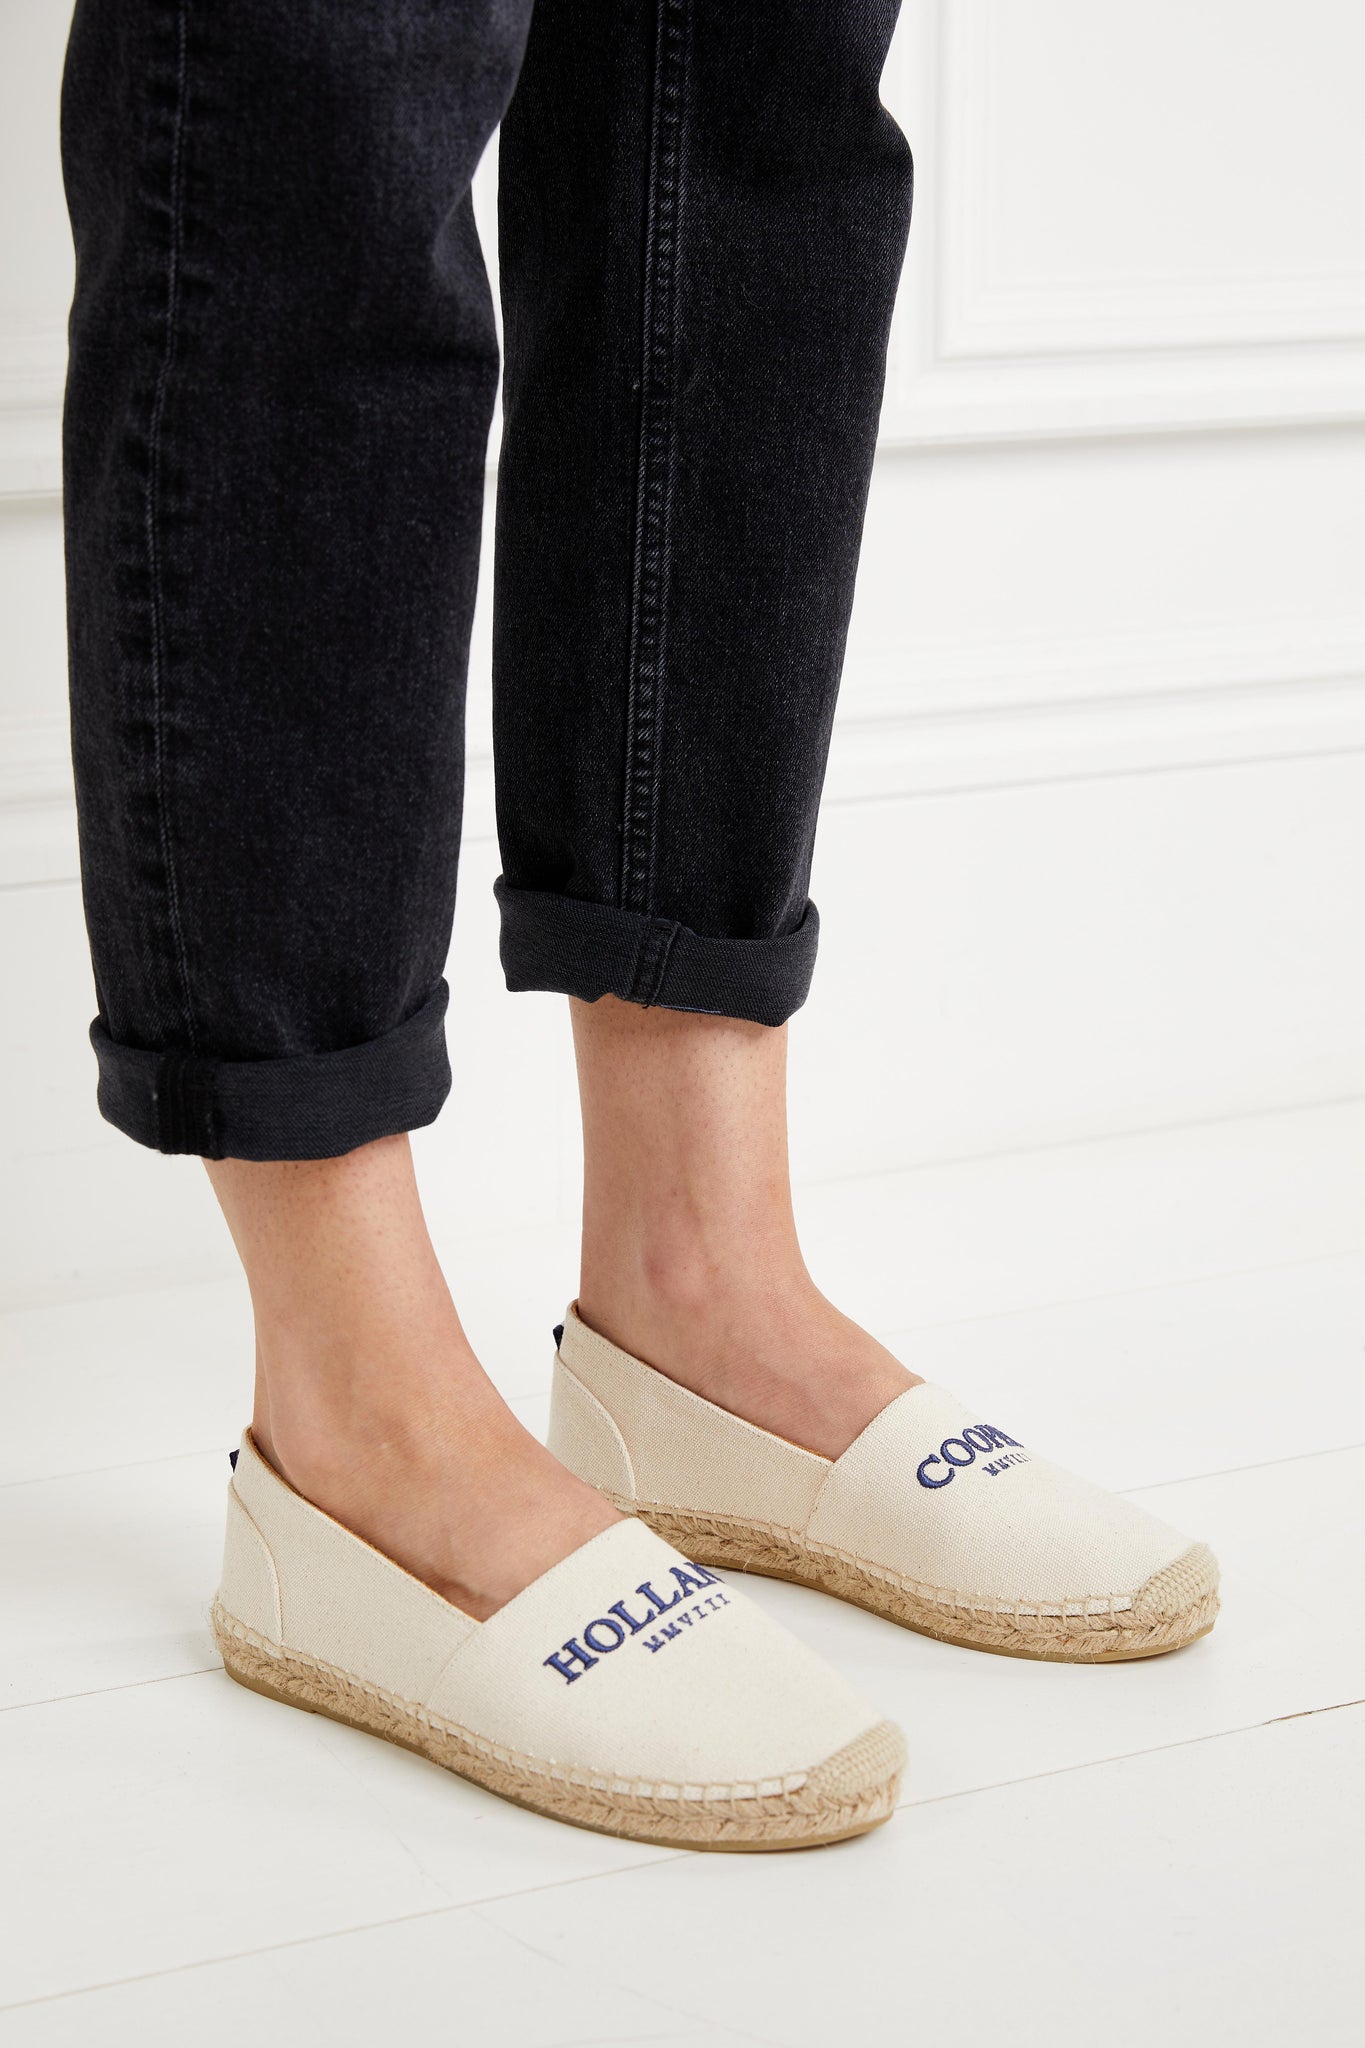 classic style natural canvas espadrille with plaited jute sole and jute toe cap with navy embroidered branding on top, paired with rolled up black slim jeans